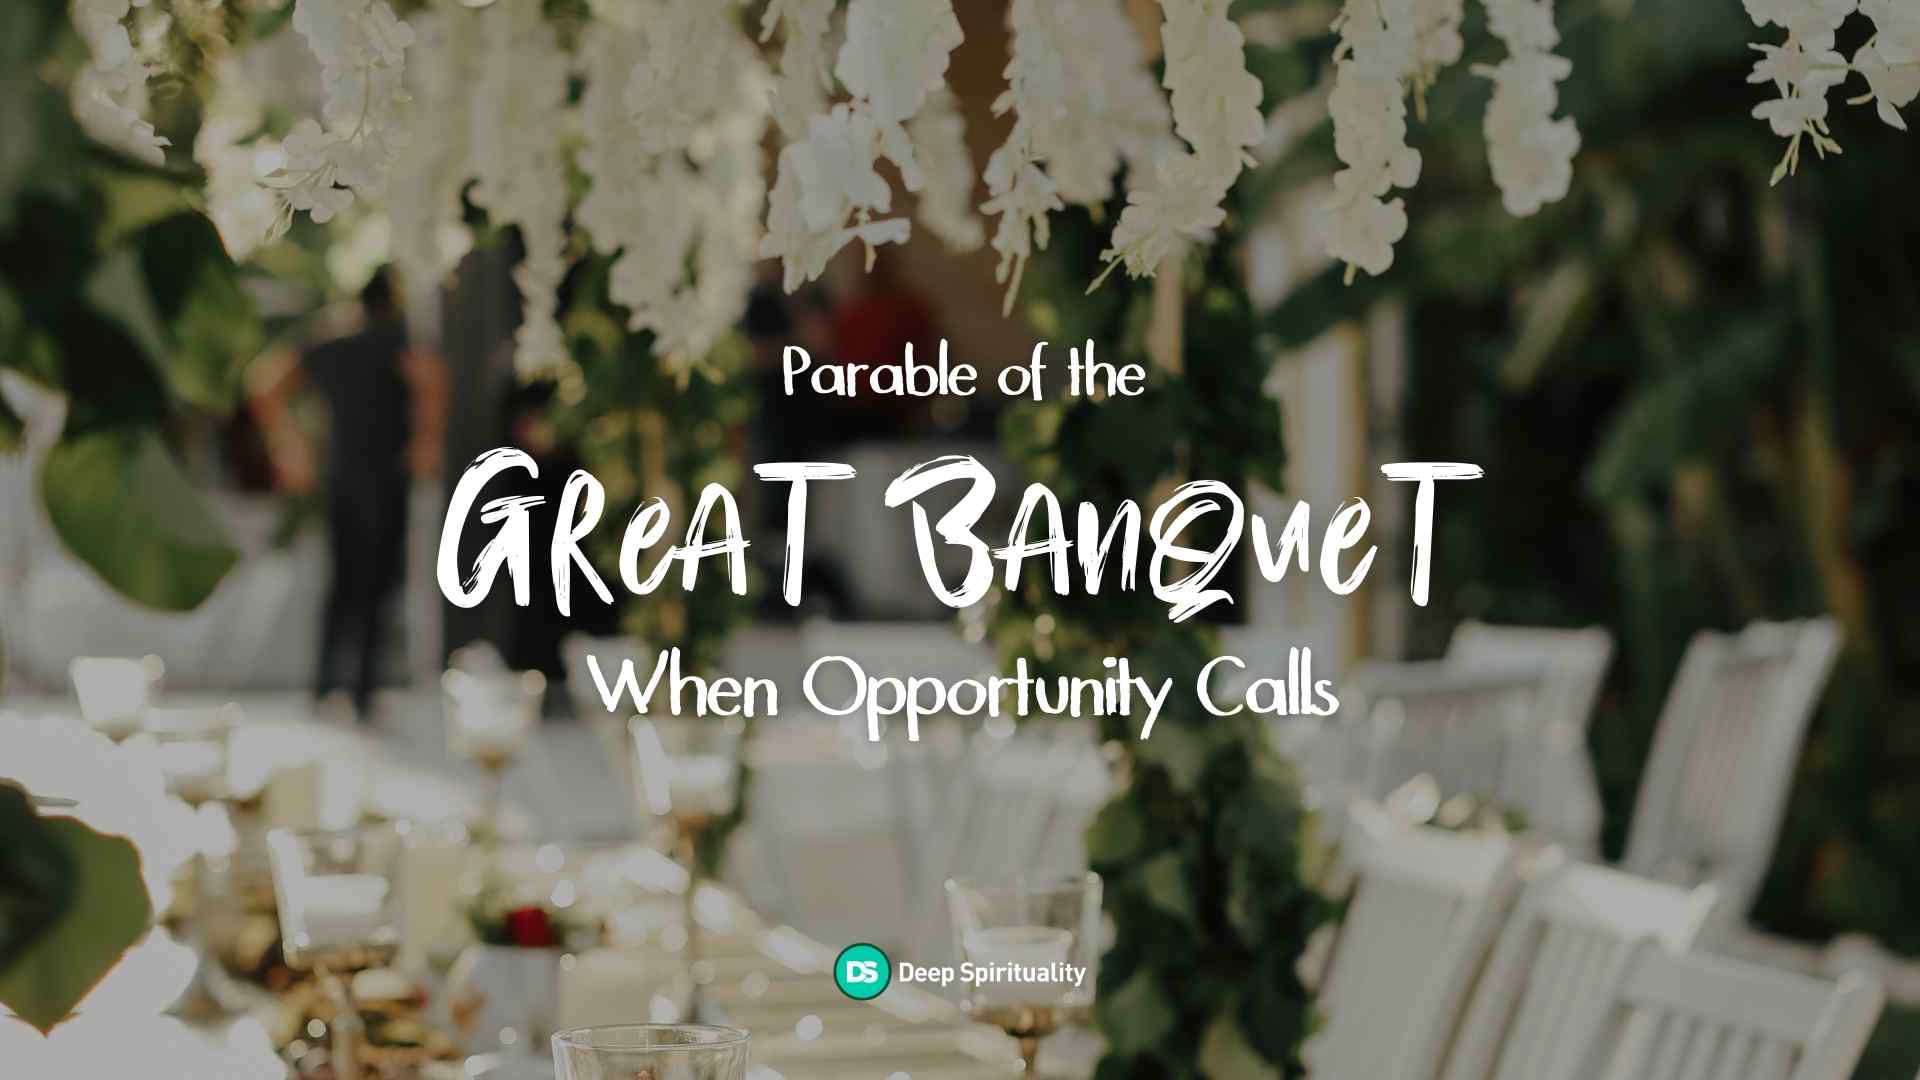 Parable of the Great Banquet: When Opportunity Calls 16